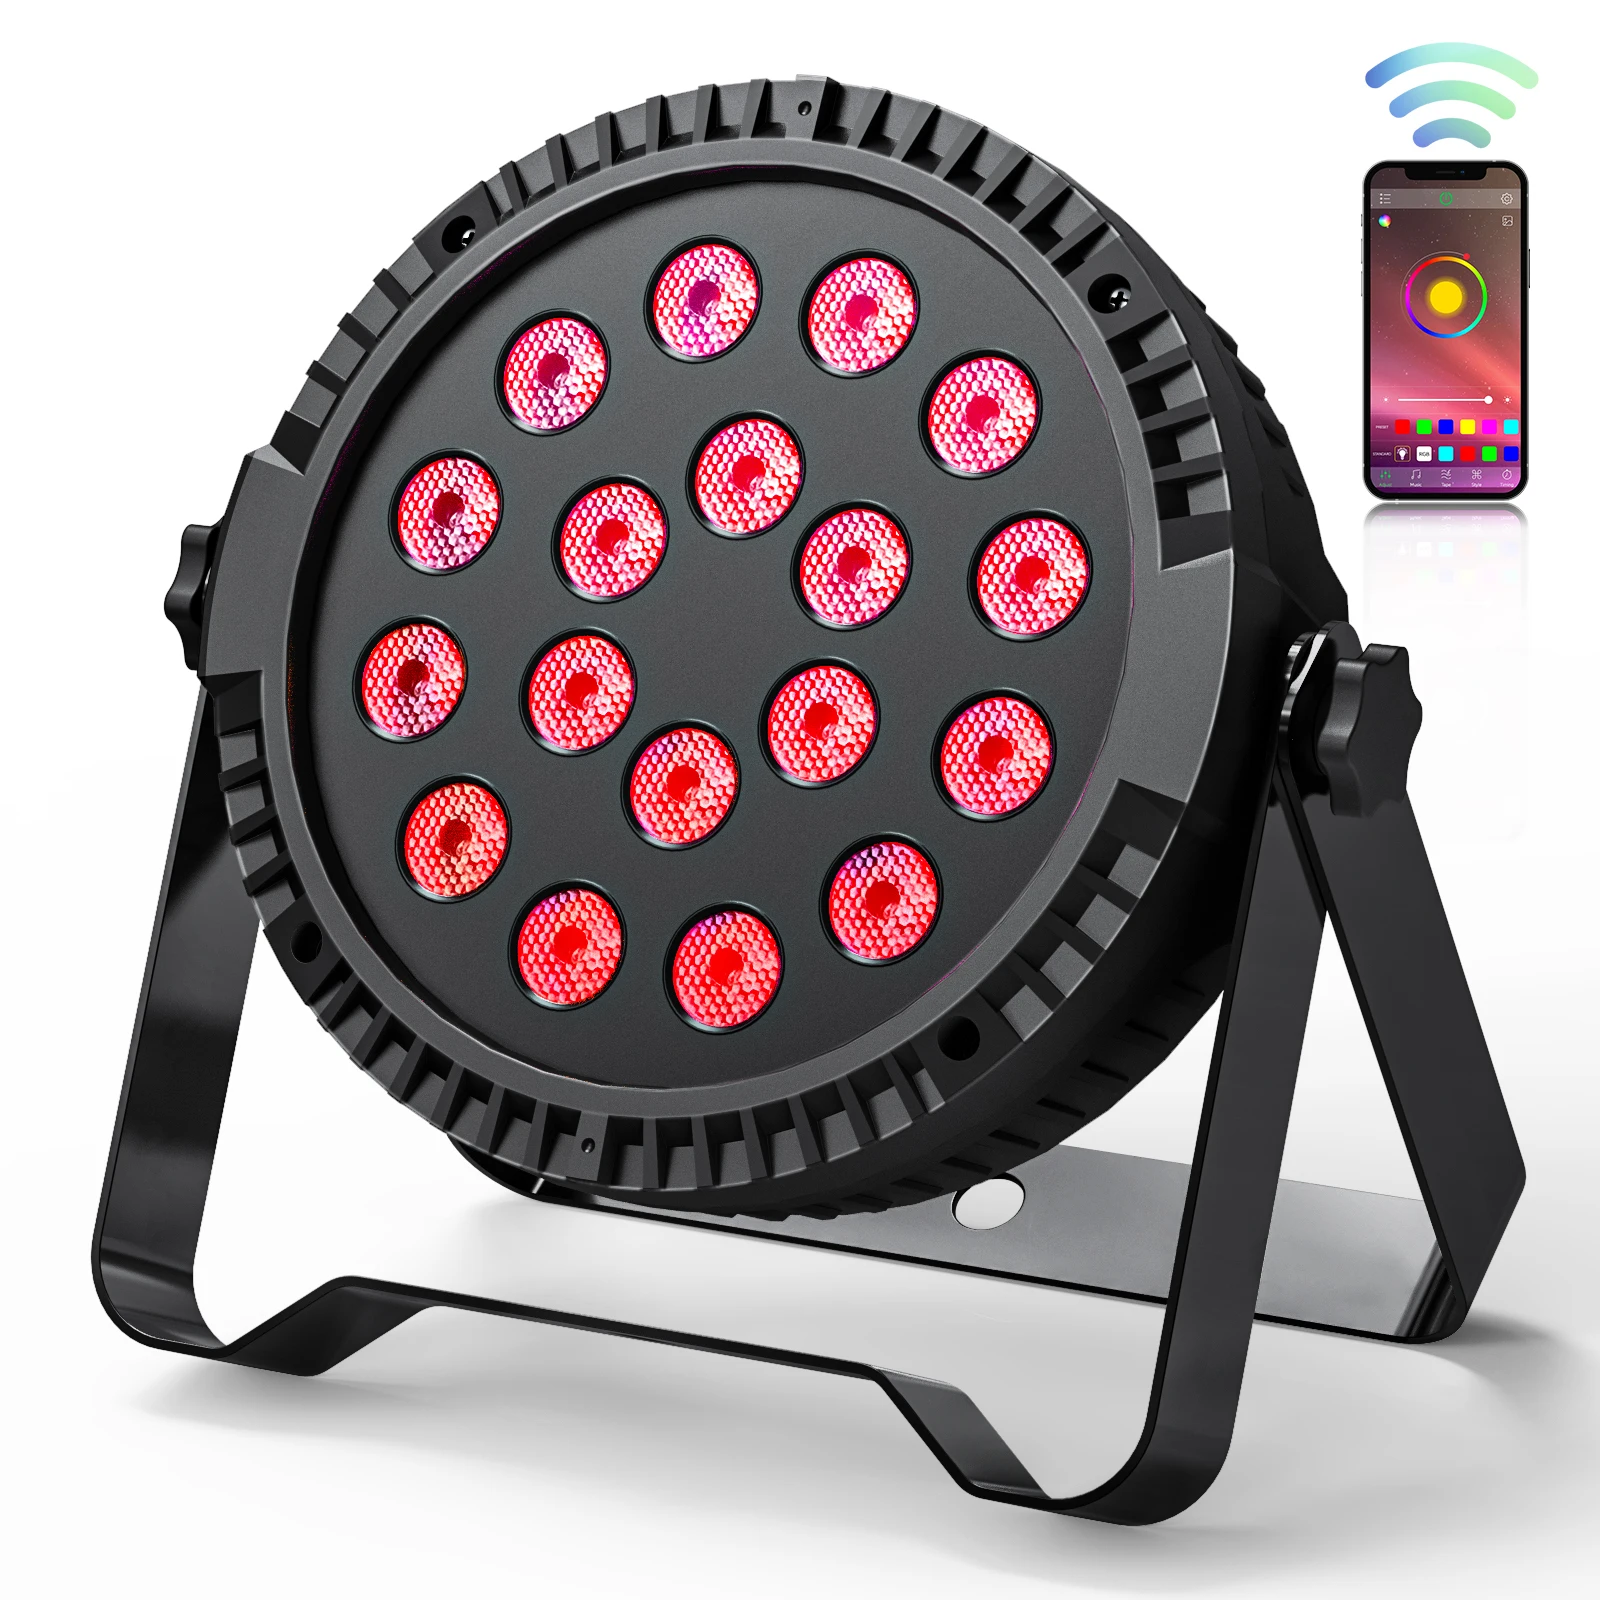 18W Par Light 18LED RGB 3-in-1 Stage Lights HOLDLAMP Colour Mixing for Party DJ Disco Show With App Control